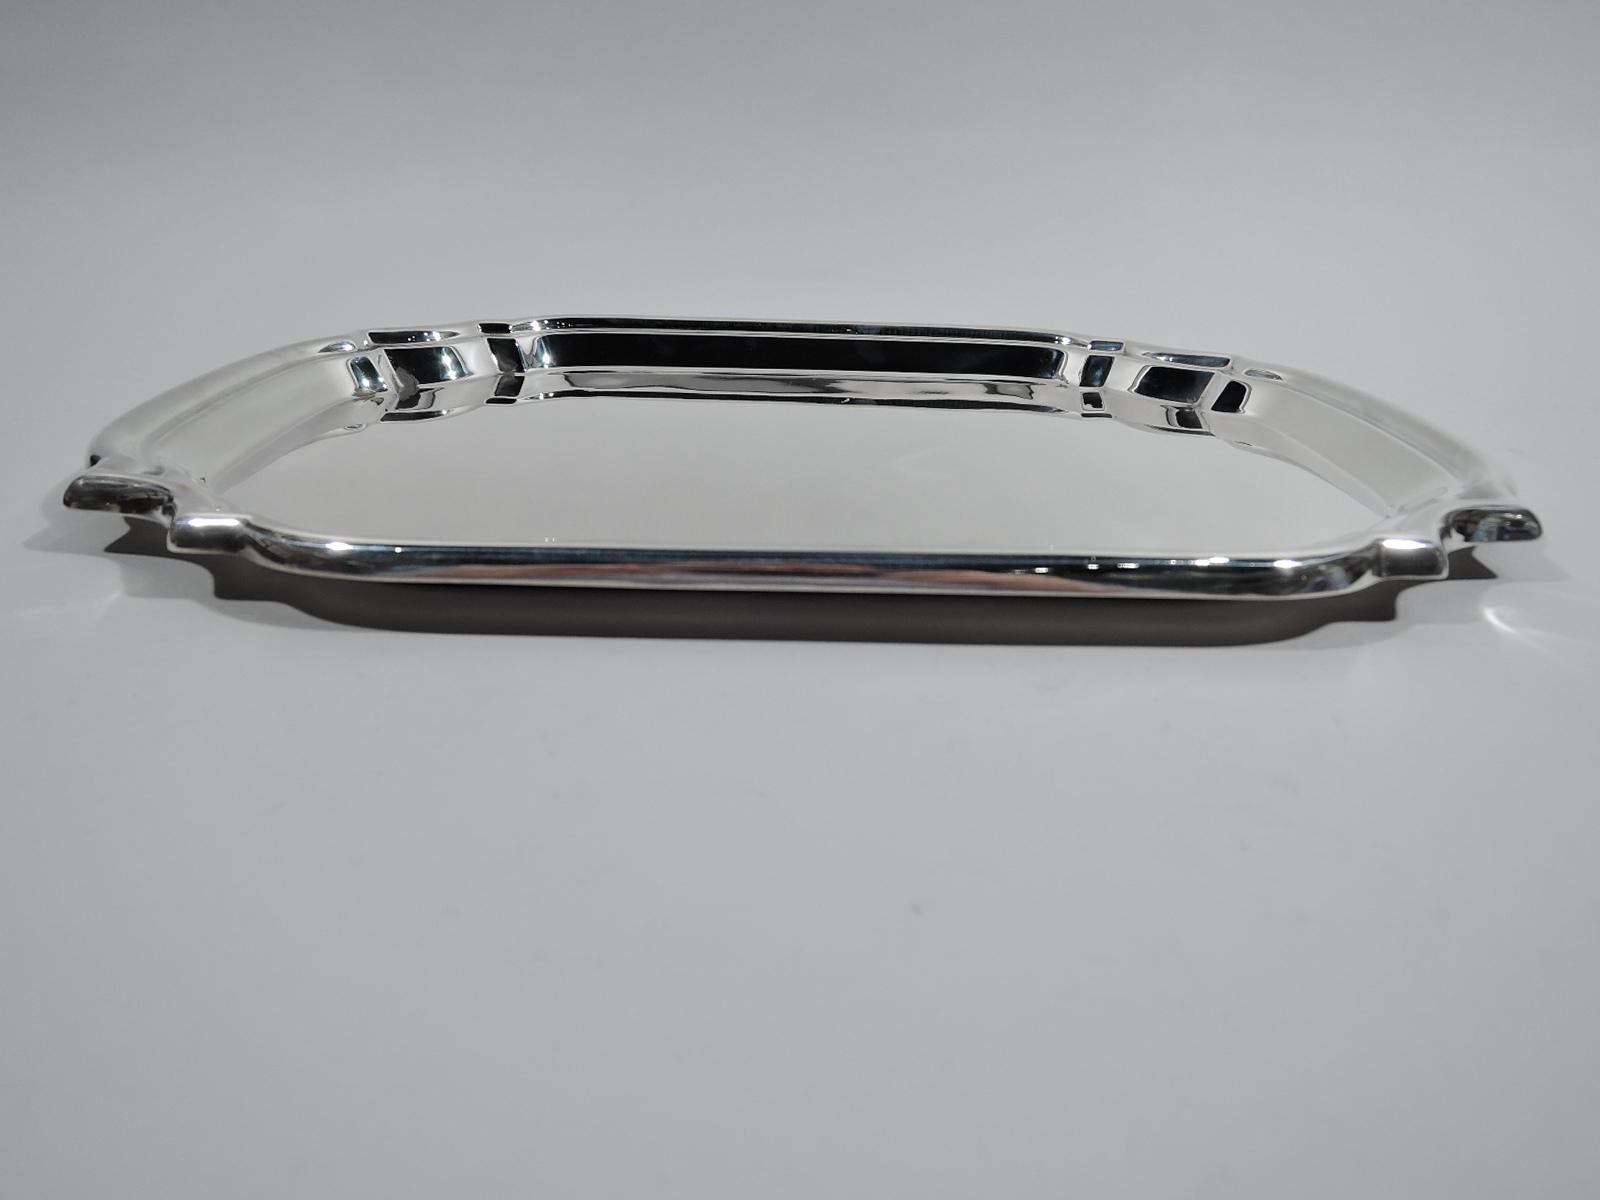 Georgian-inspired sterling silver tray. Made by Poole in Taunton, Mass. Rectangular cartouche with curved sides and curvilinear corners. A great party platter. Marked “Sterling by Poole / 372”. Weight: 30 troy ounces.